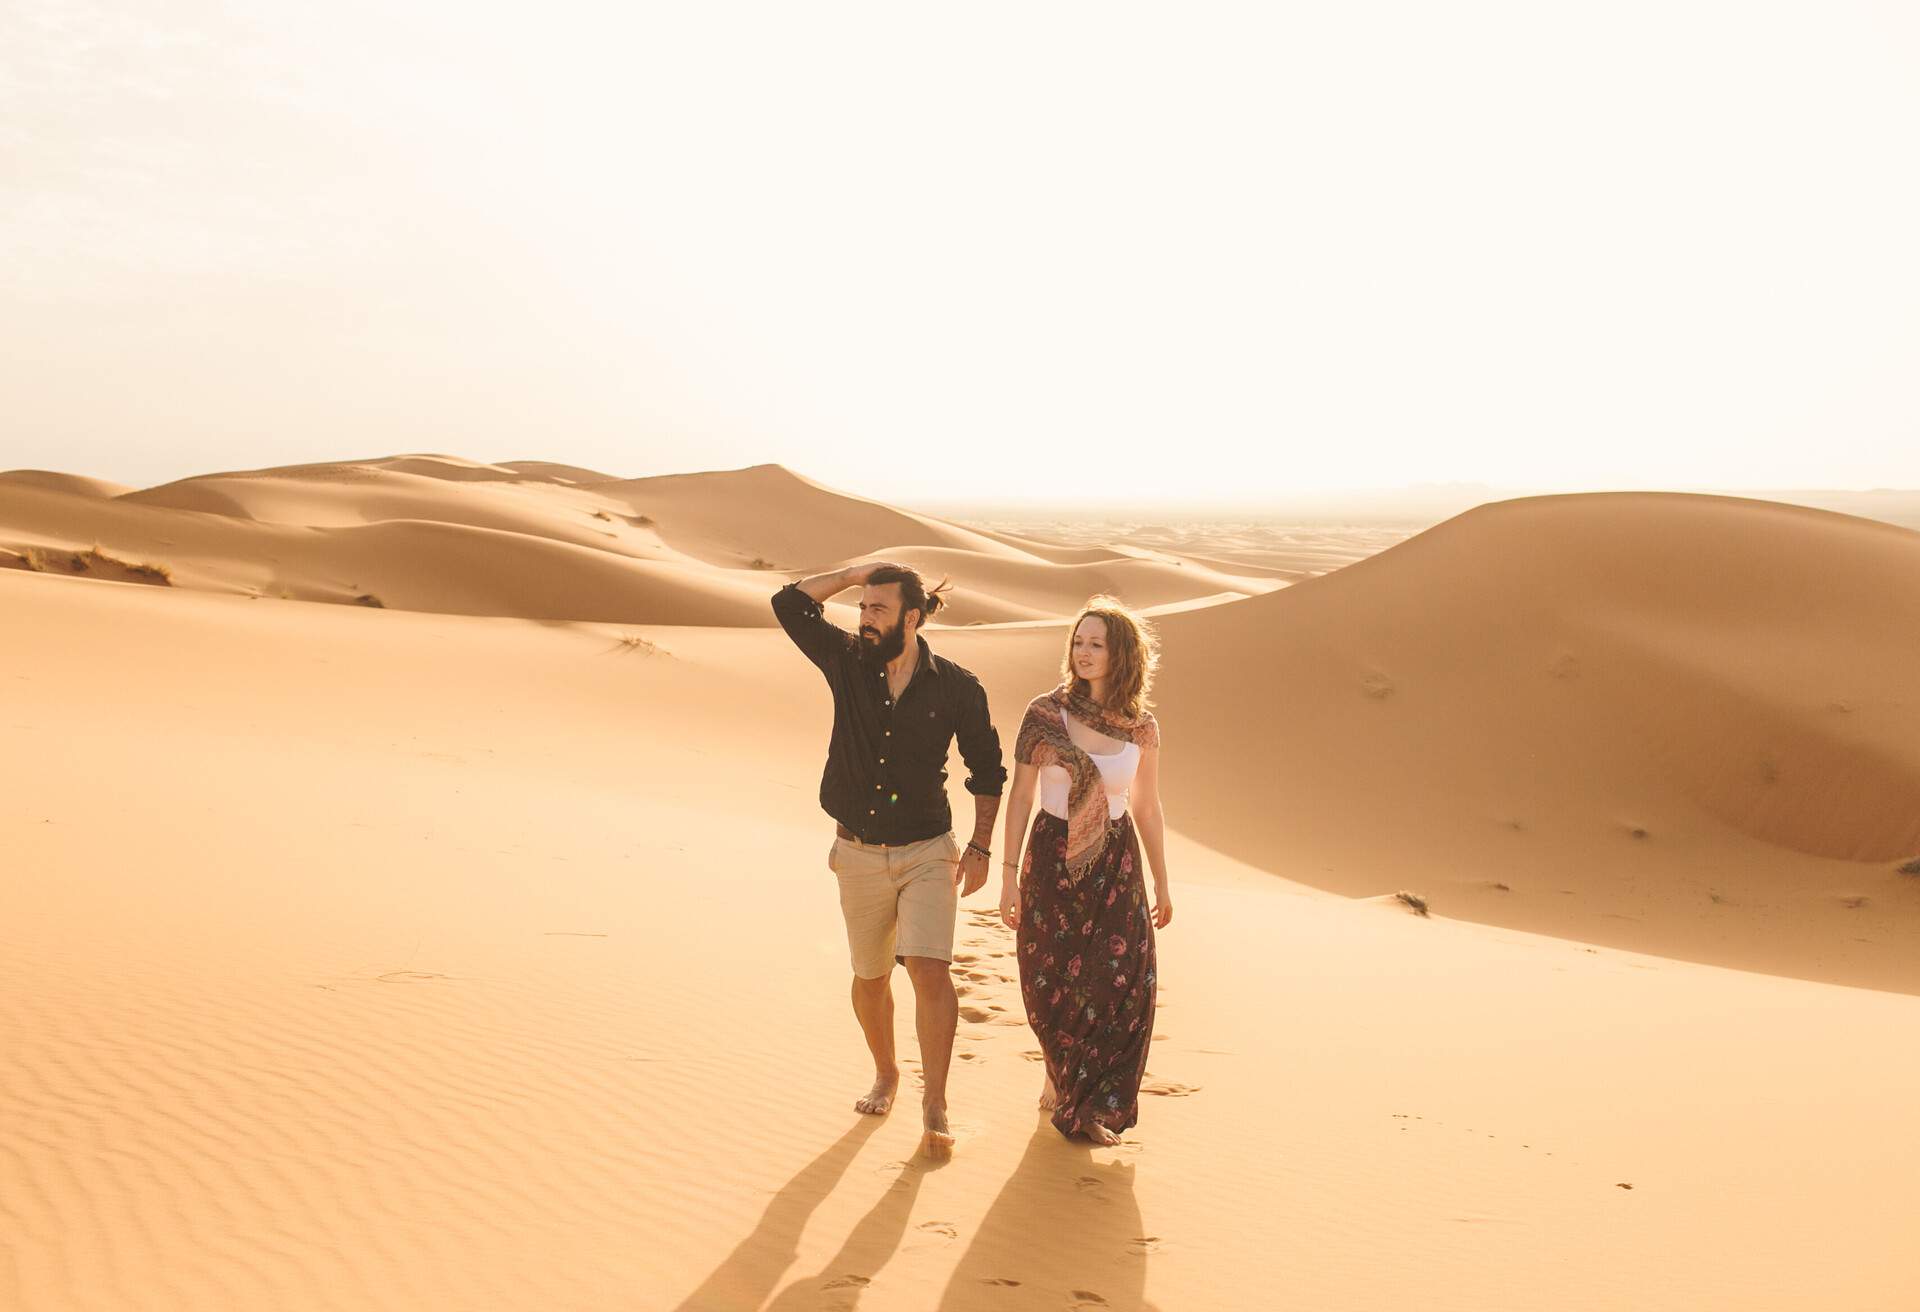 Two people strolling down a sand dune in casual dress against a blue sky.